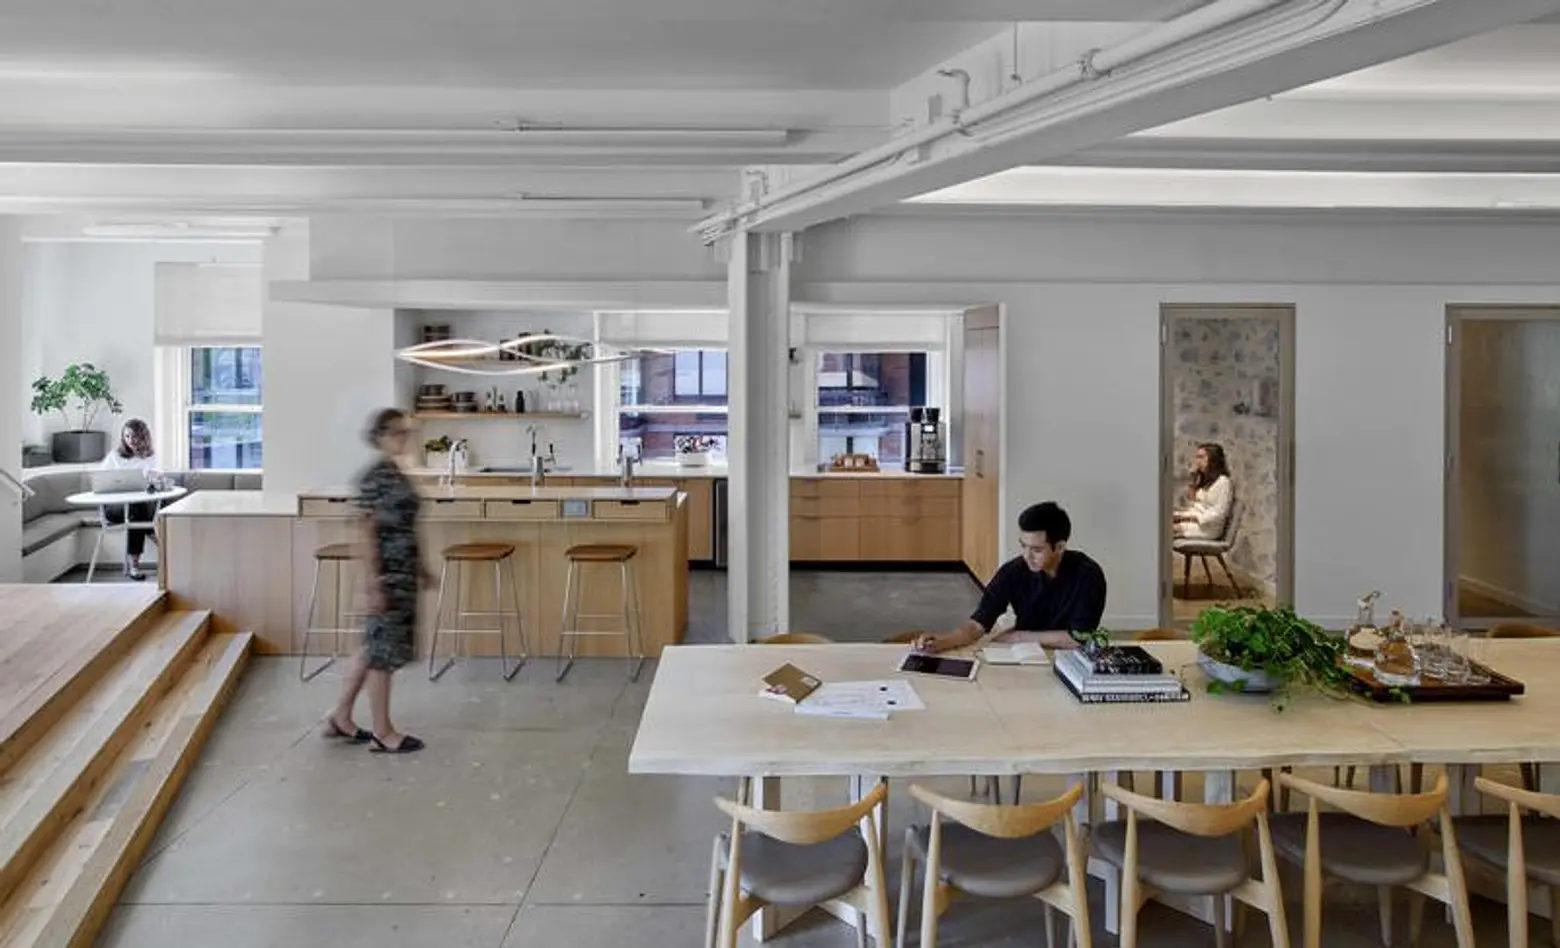 Join 6sqft and Untapped Cities for a new tour series of NYC architecture studios